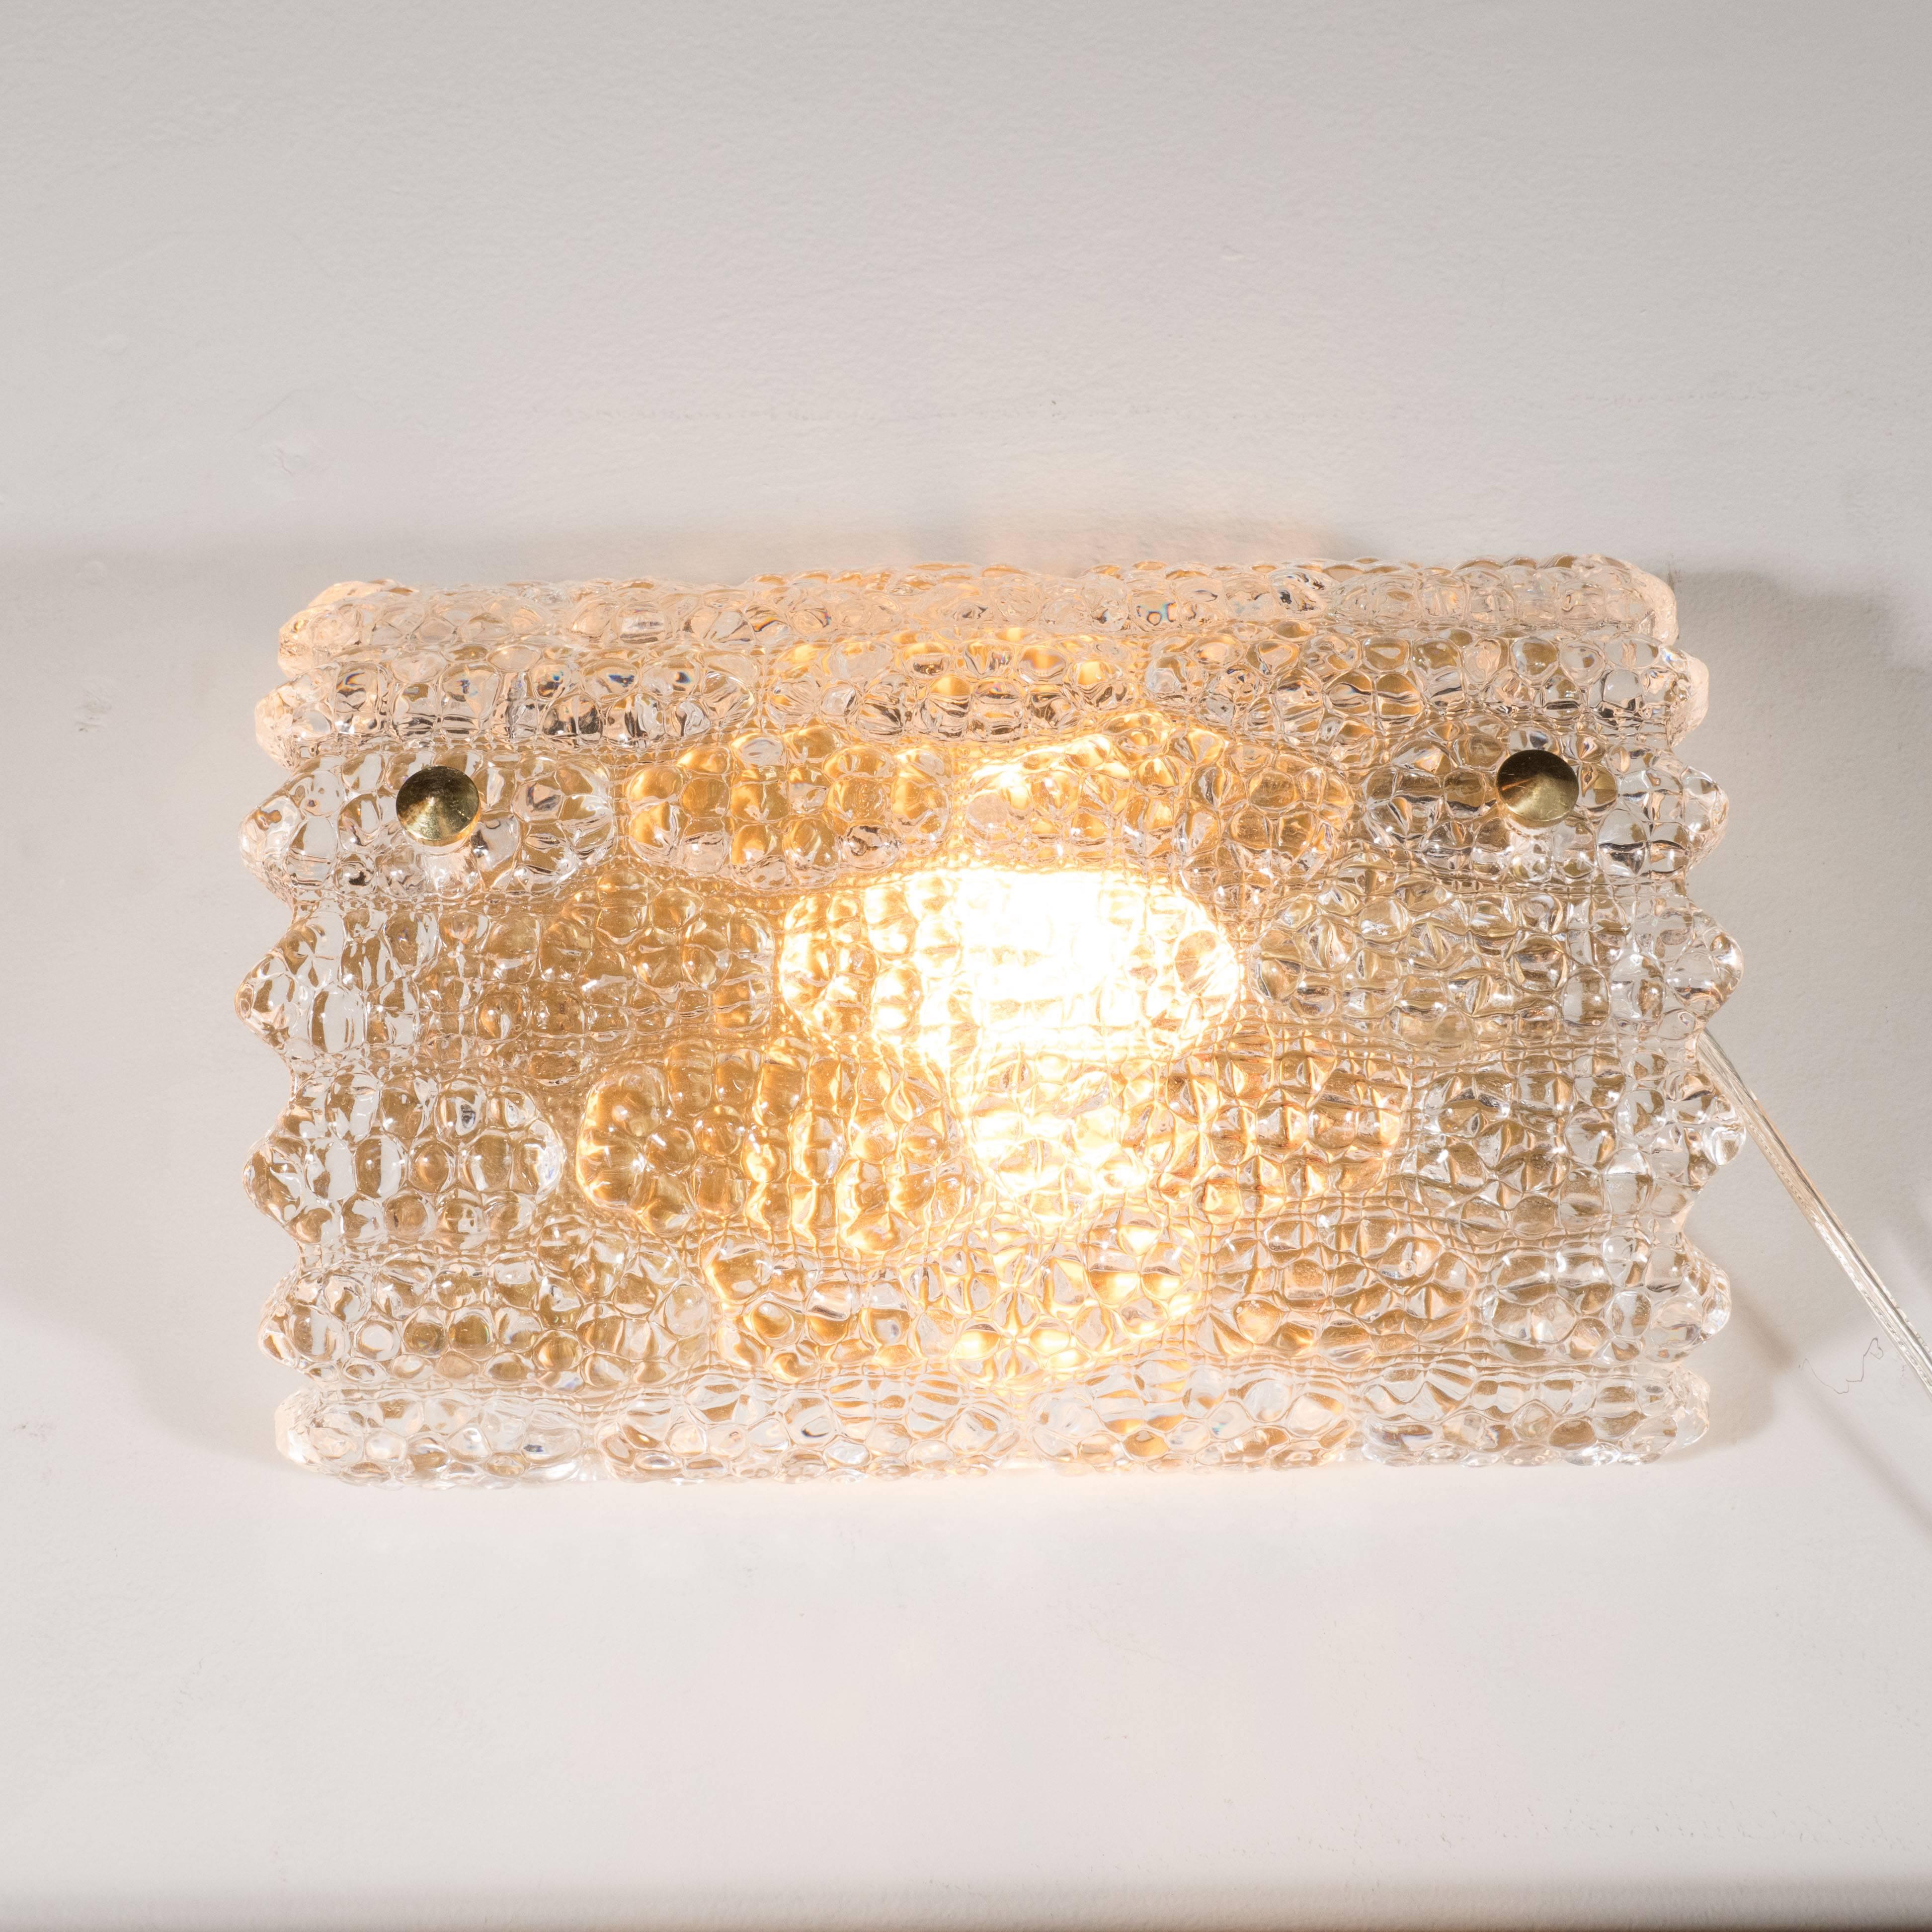 This Mid-Century Modernist vanity light by Carl Fagerlund for Orrefors features sophisticated organic, free-form design in a sculptural handblown textured glass shade mounted on brass fittings. This fixture holds (1) 100 watt Edison-base bulb. It